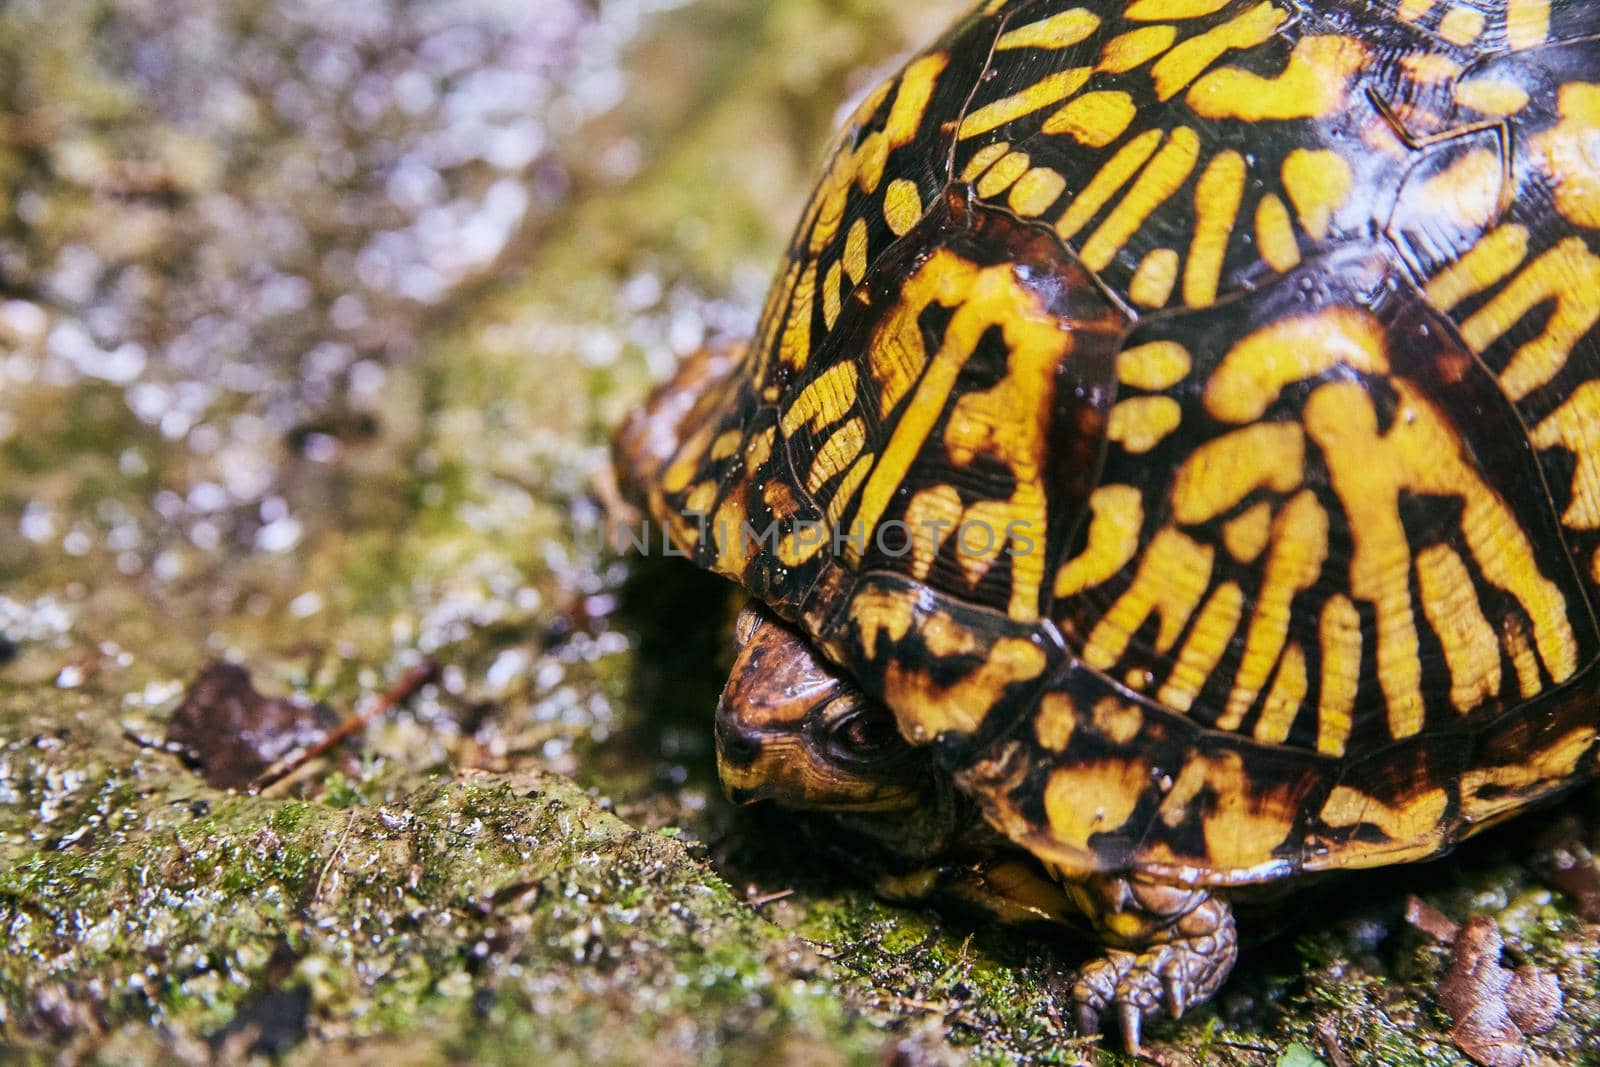 Image of Beautiful turtle with yellow and black shell hiding on wet rocks